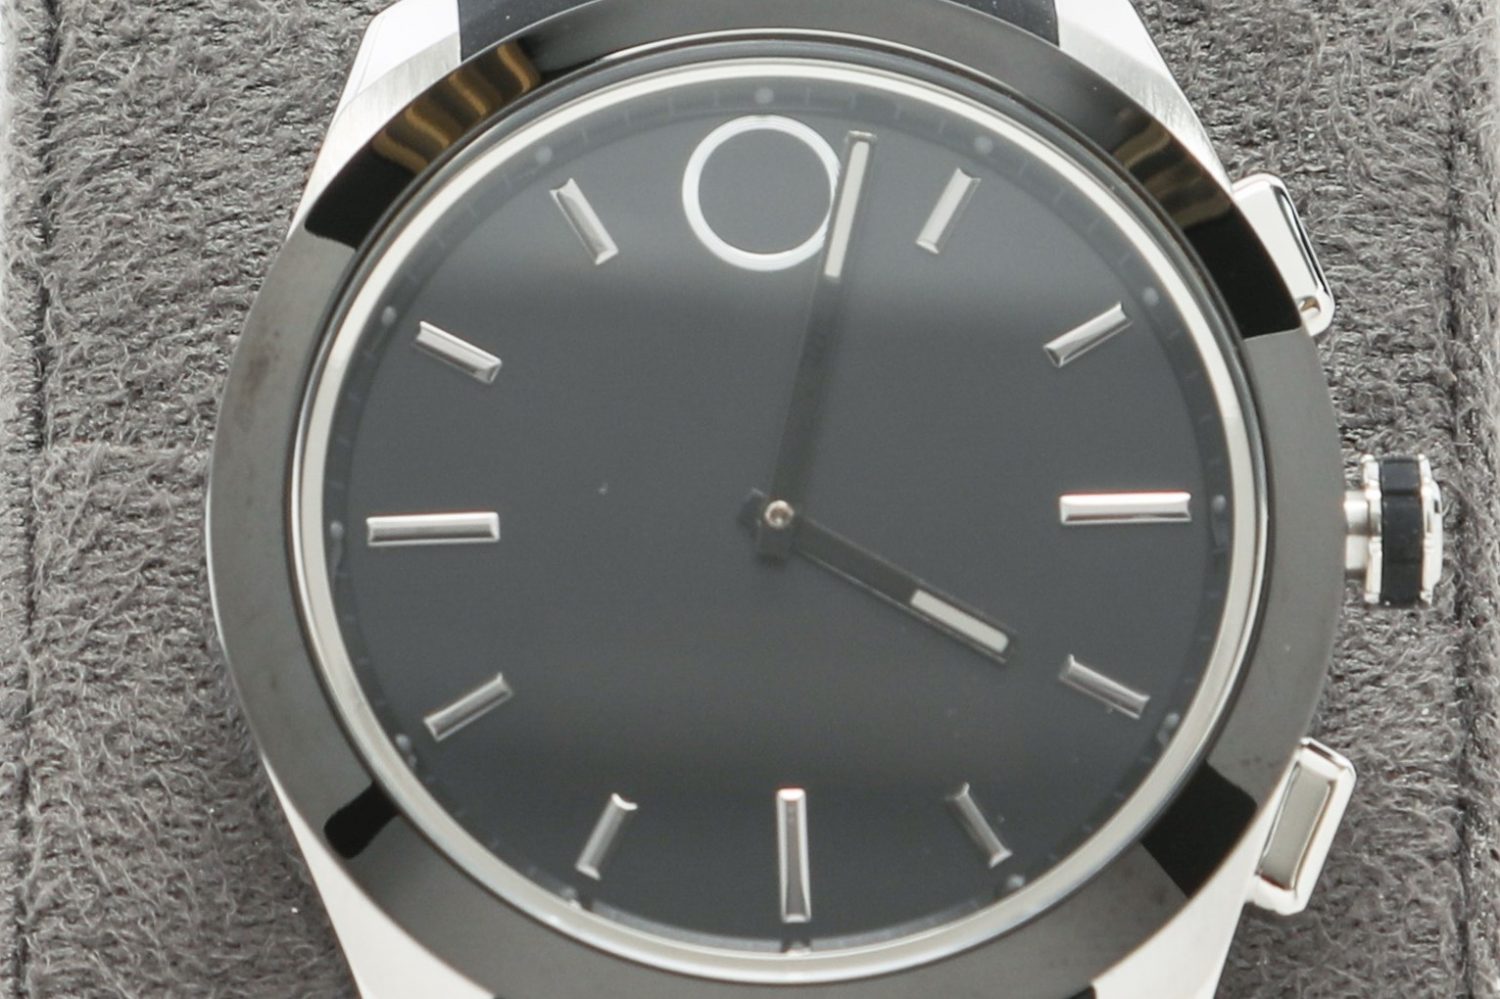 The Movado Bold Series watch with black face and straps and silver-colored accents and frame.